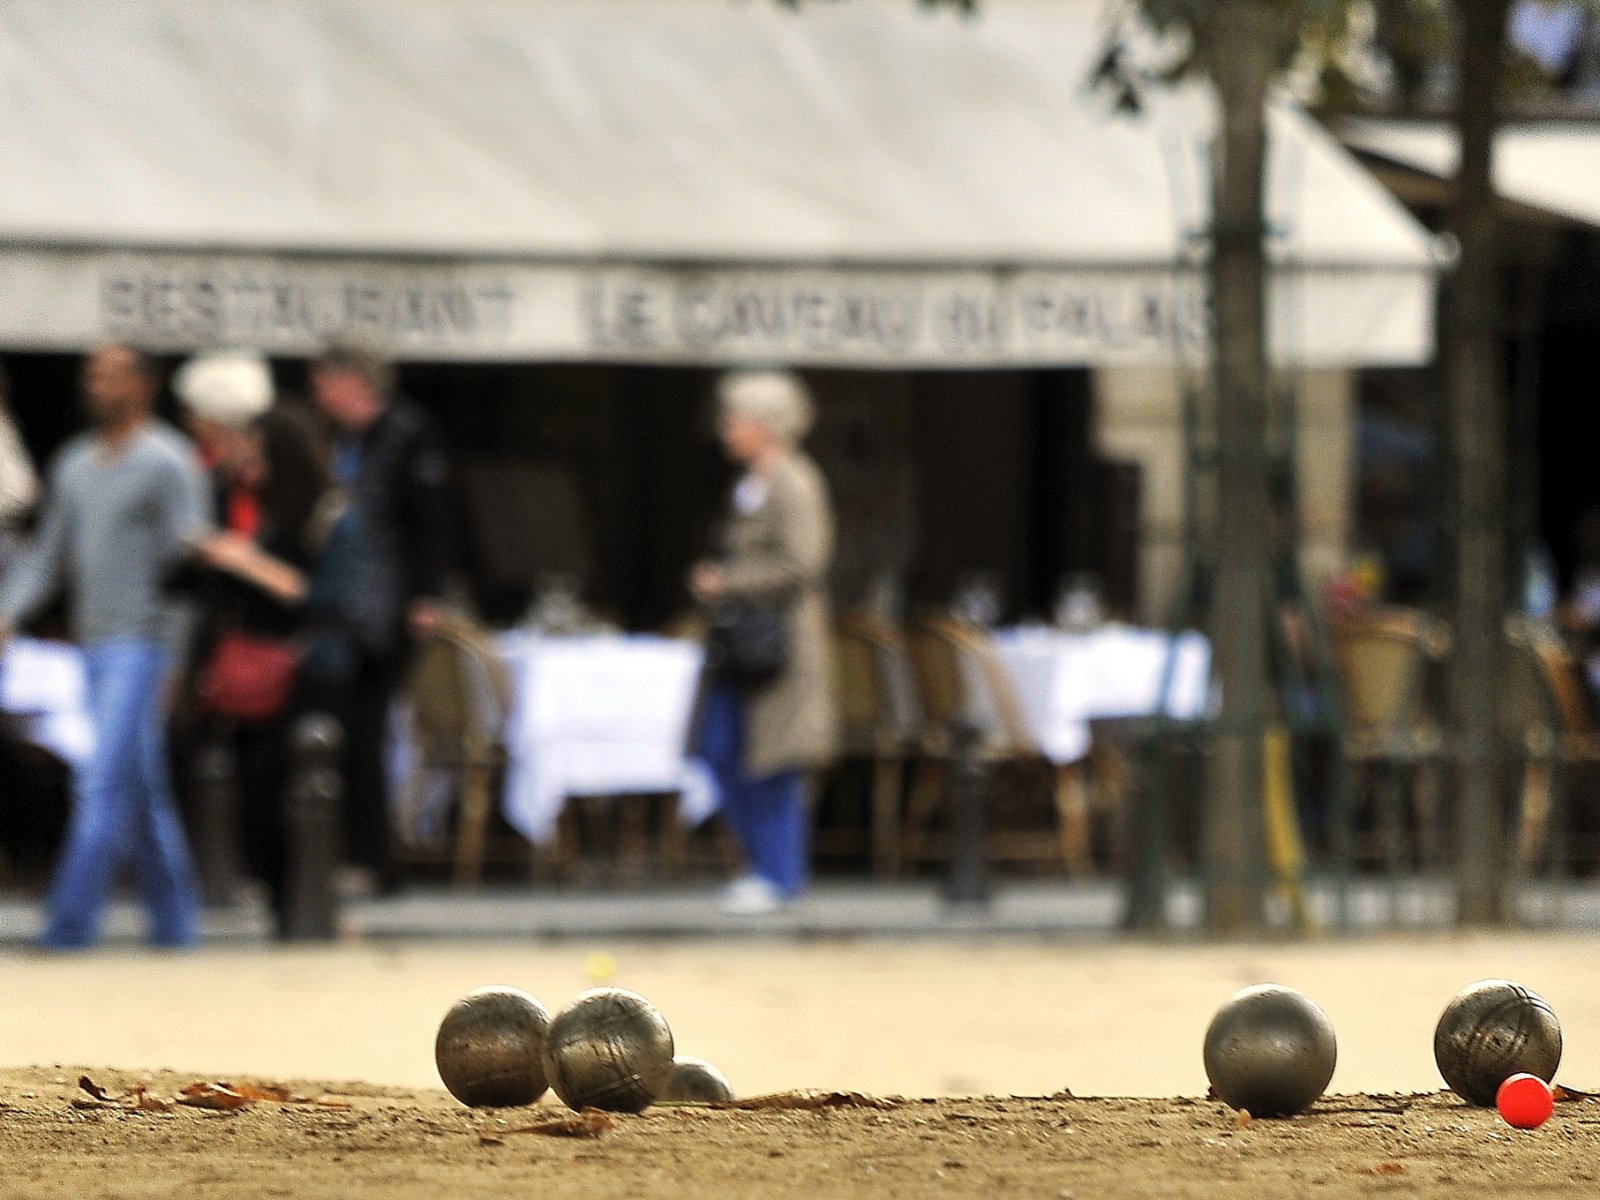 How to play petanque in Paris